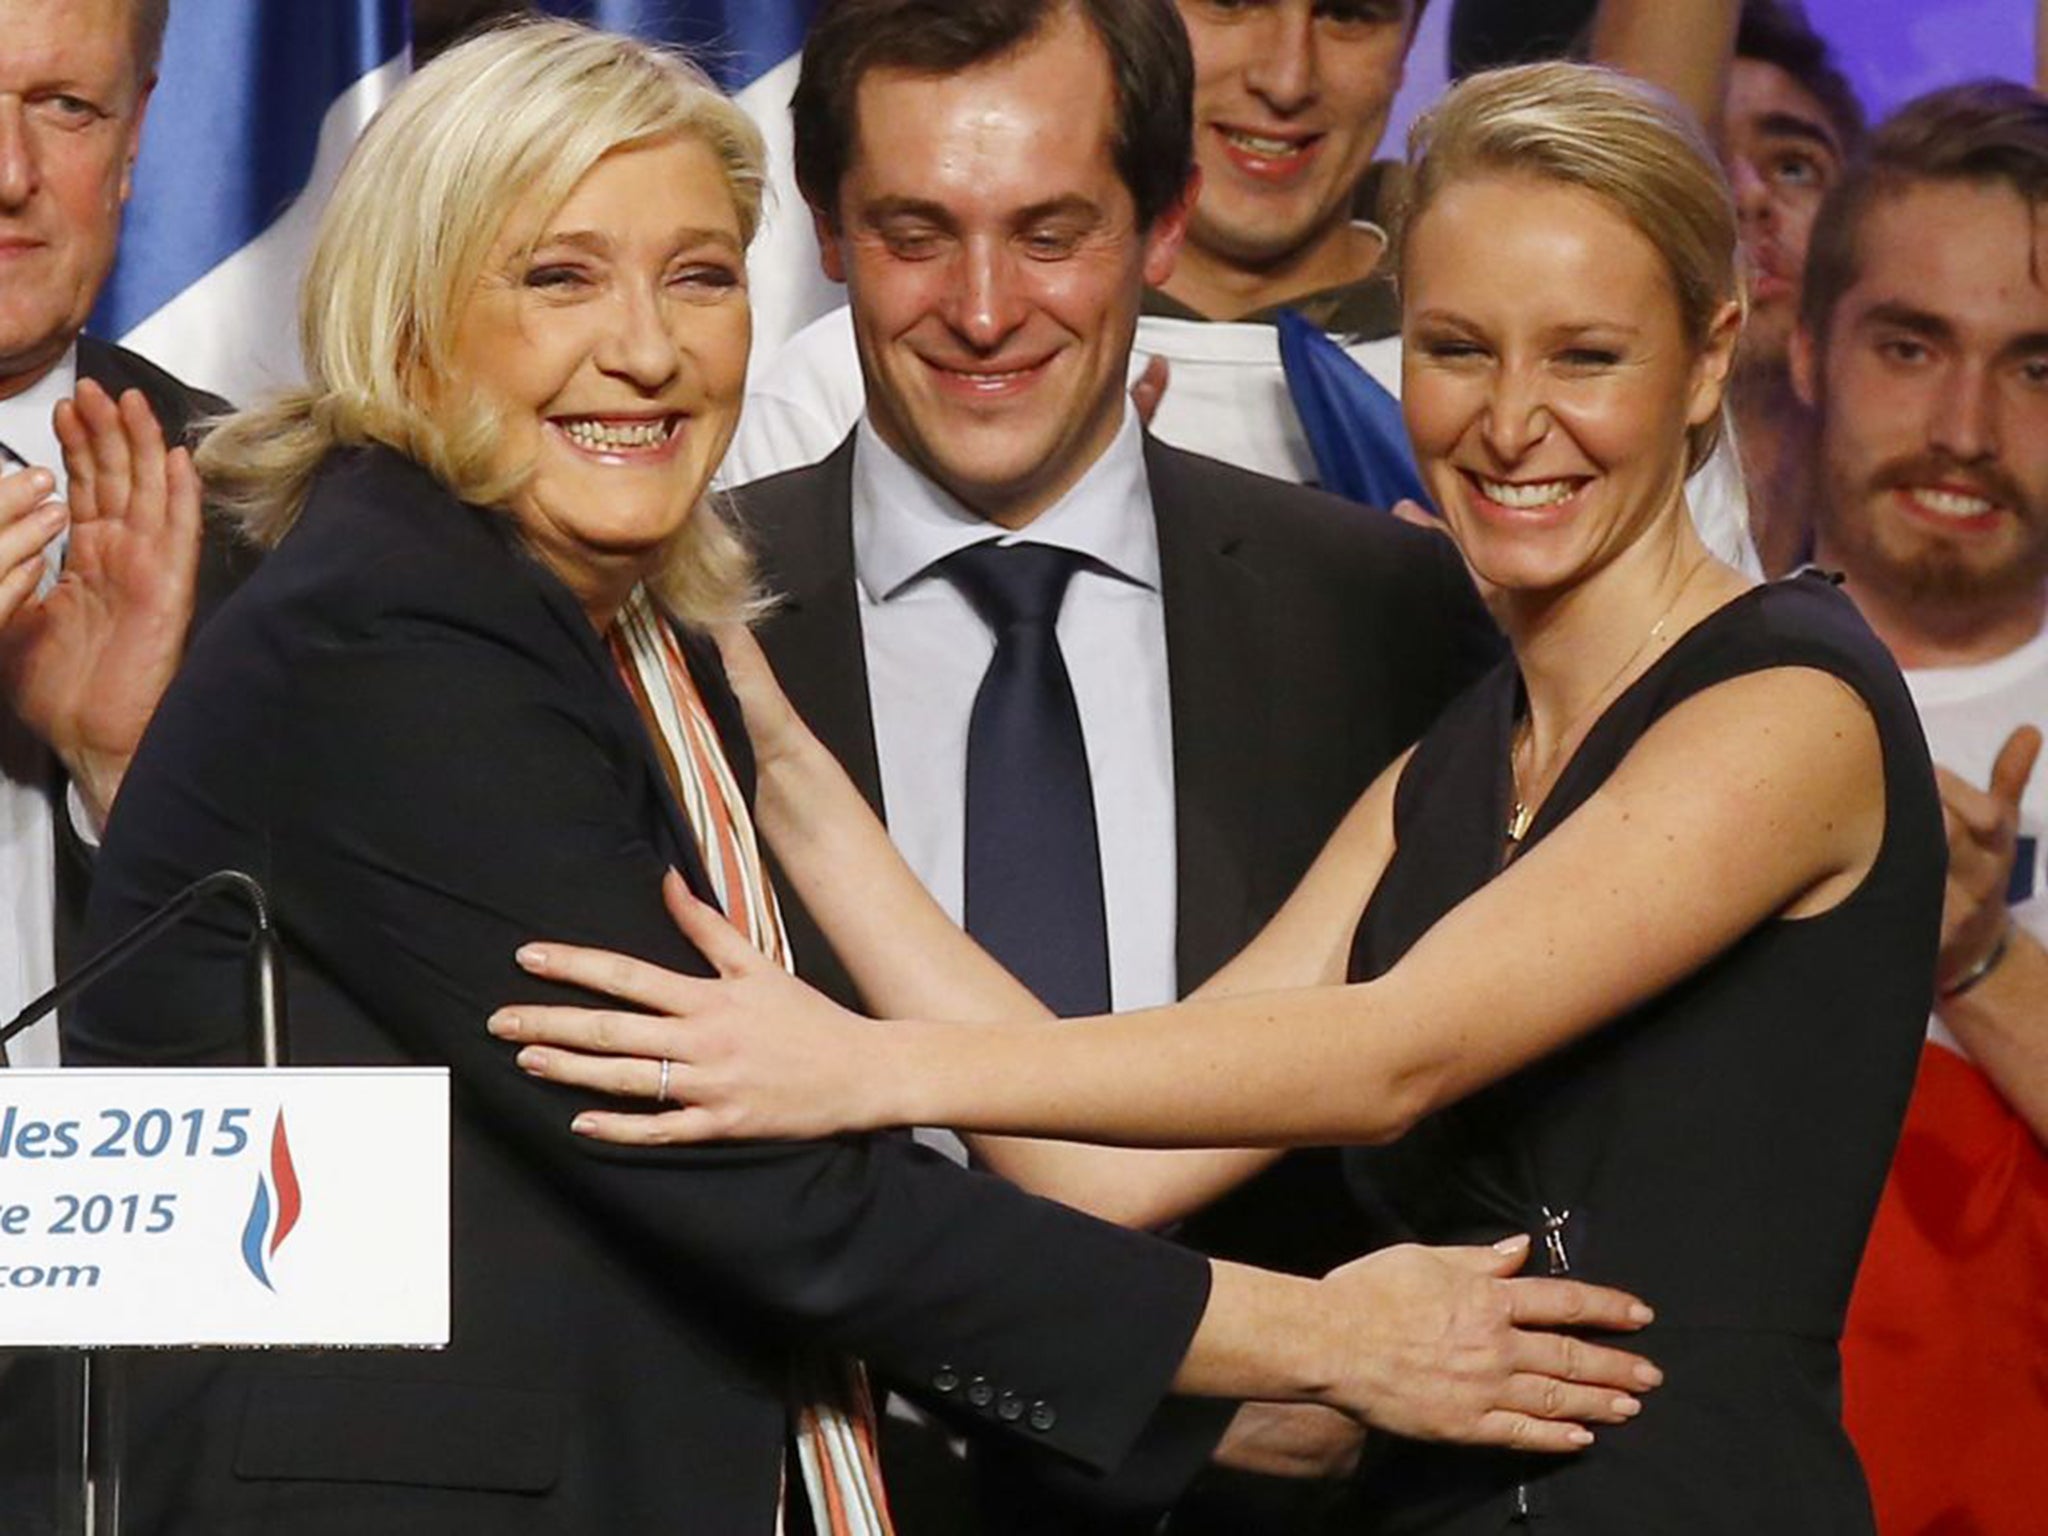 &#13;
Marine Le Pen, left, greets her neice Marion Marechal-Le Pen following their round-one victories in last week’s elections &#13;